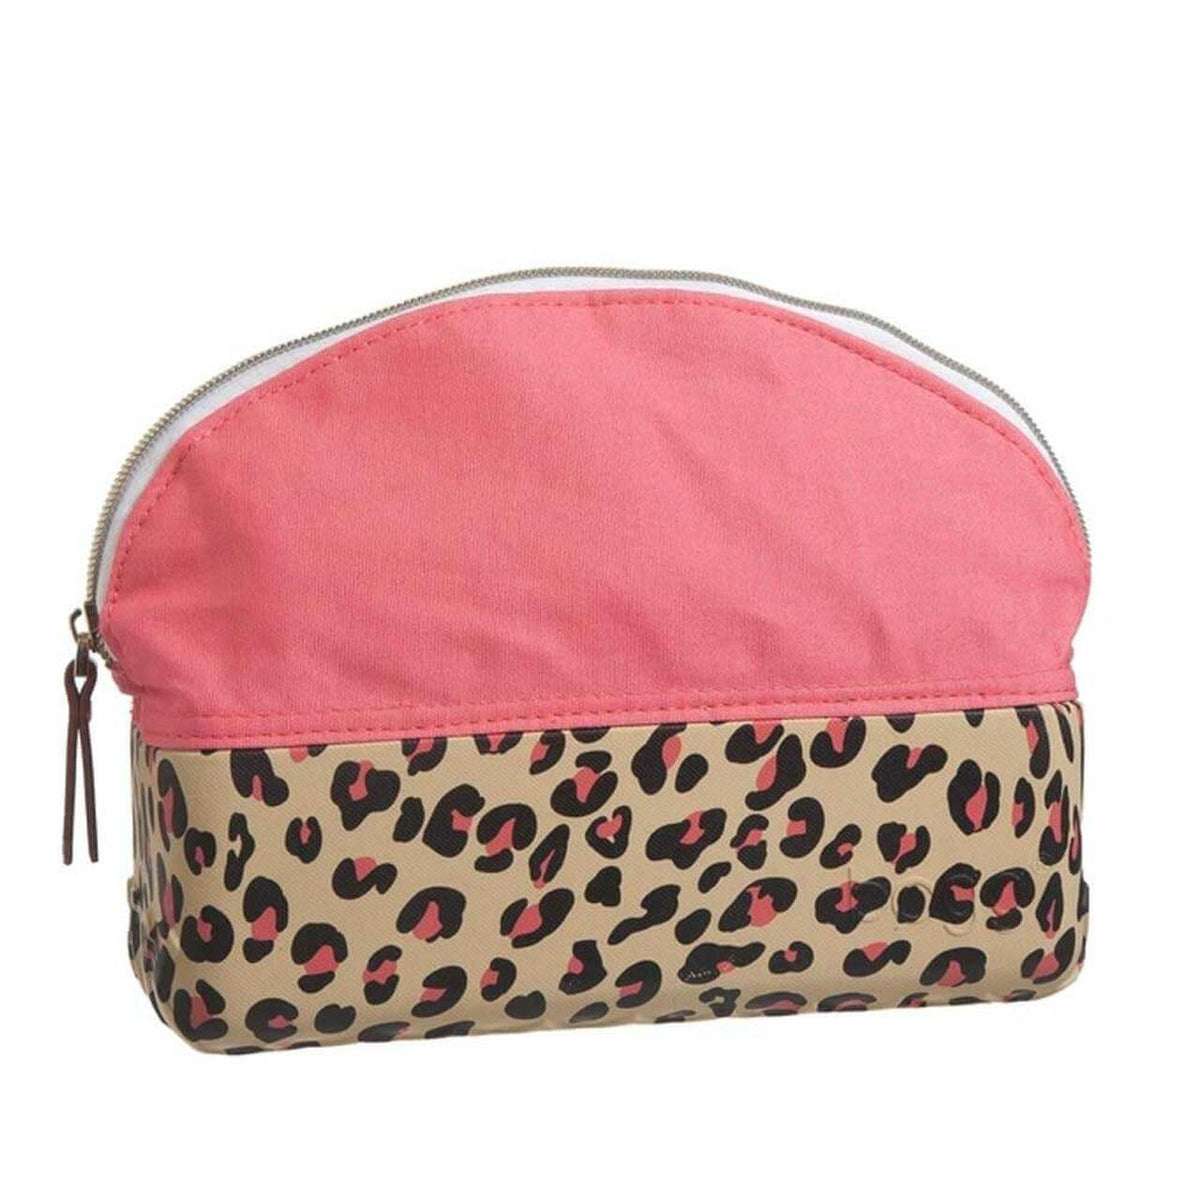 Beauty and the Bogg Cosmetic Bag- Print